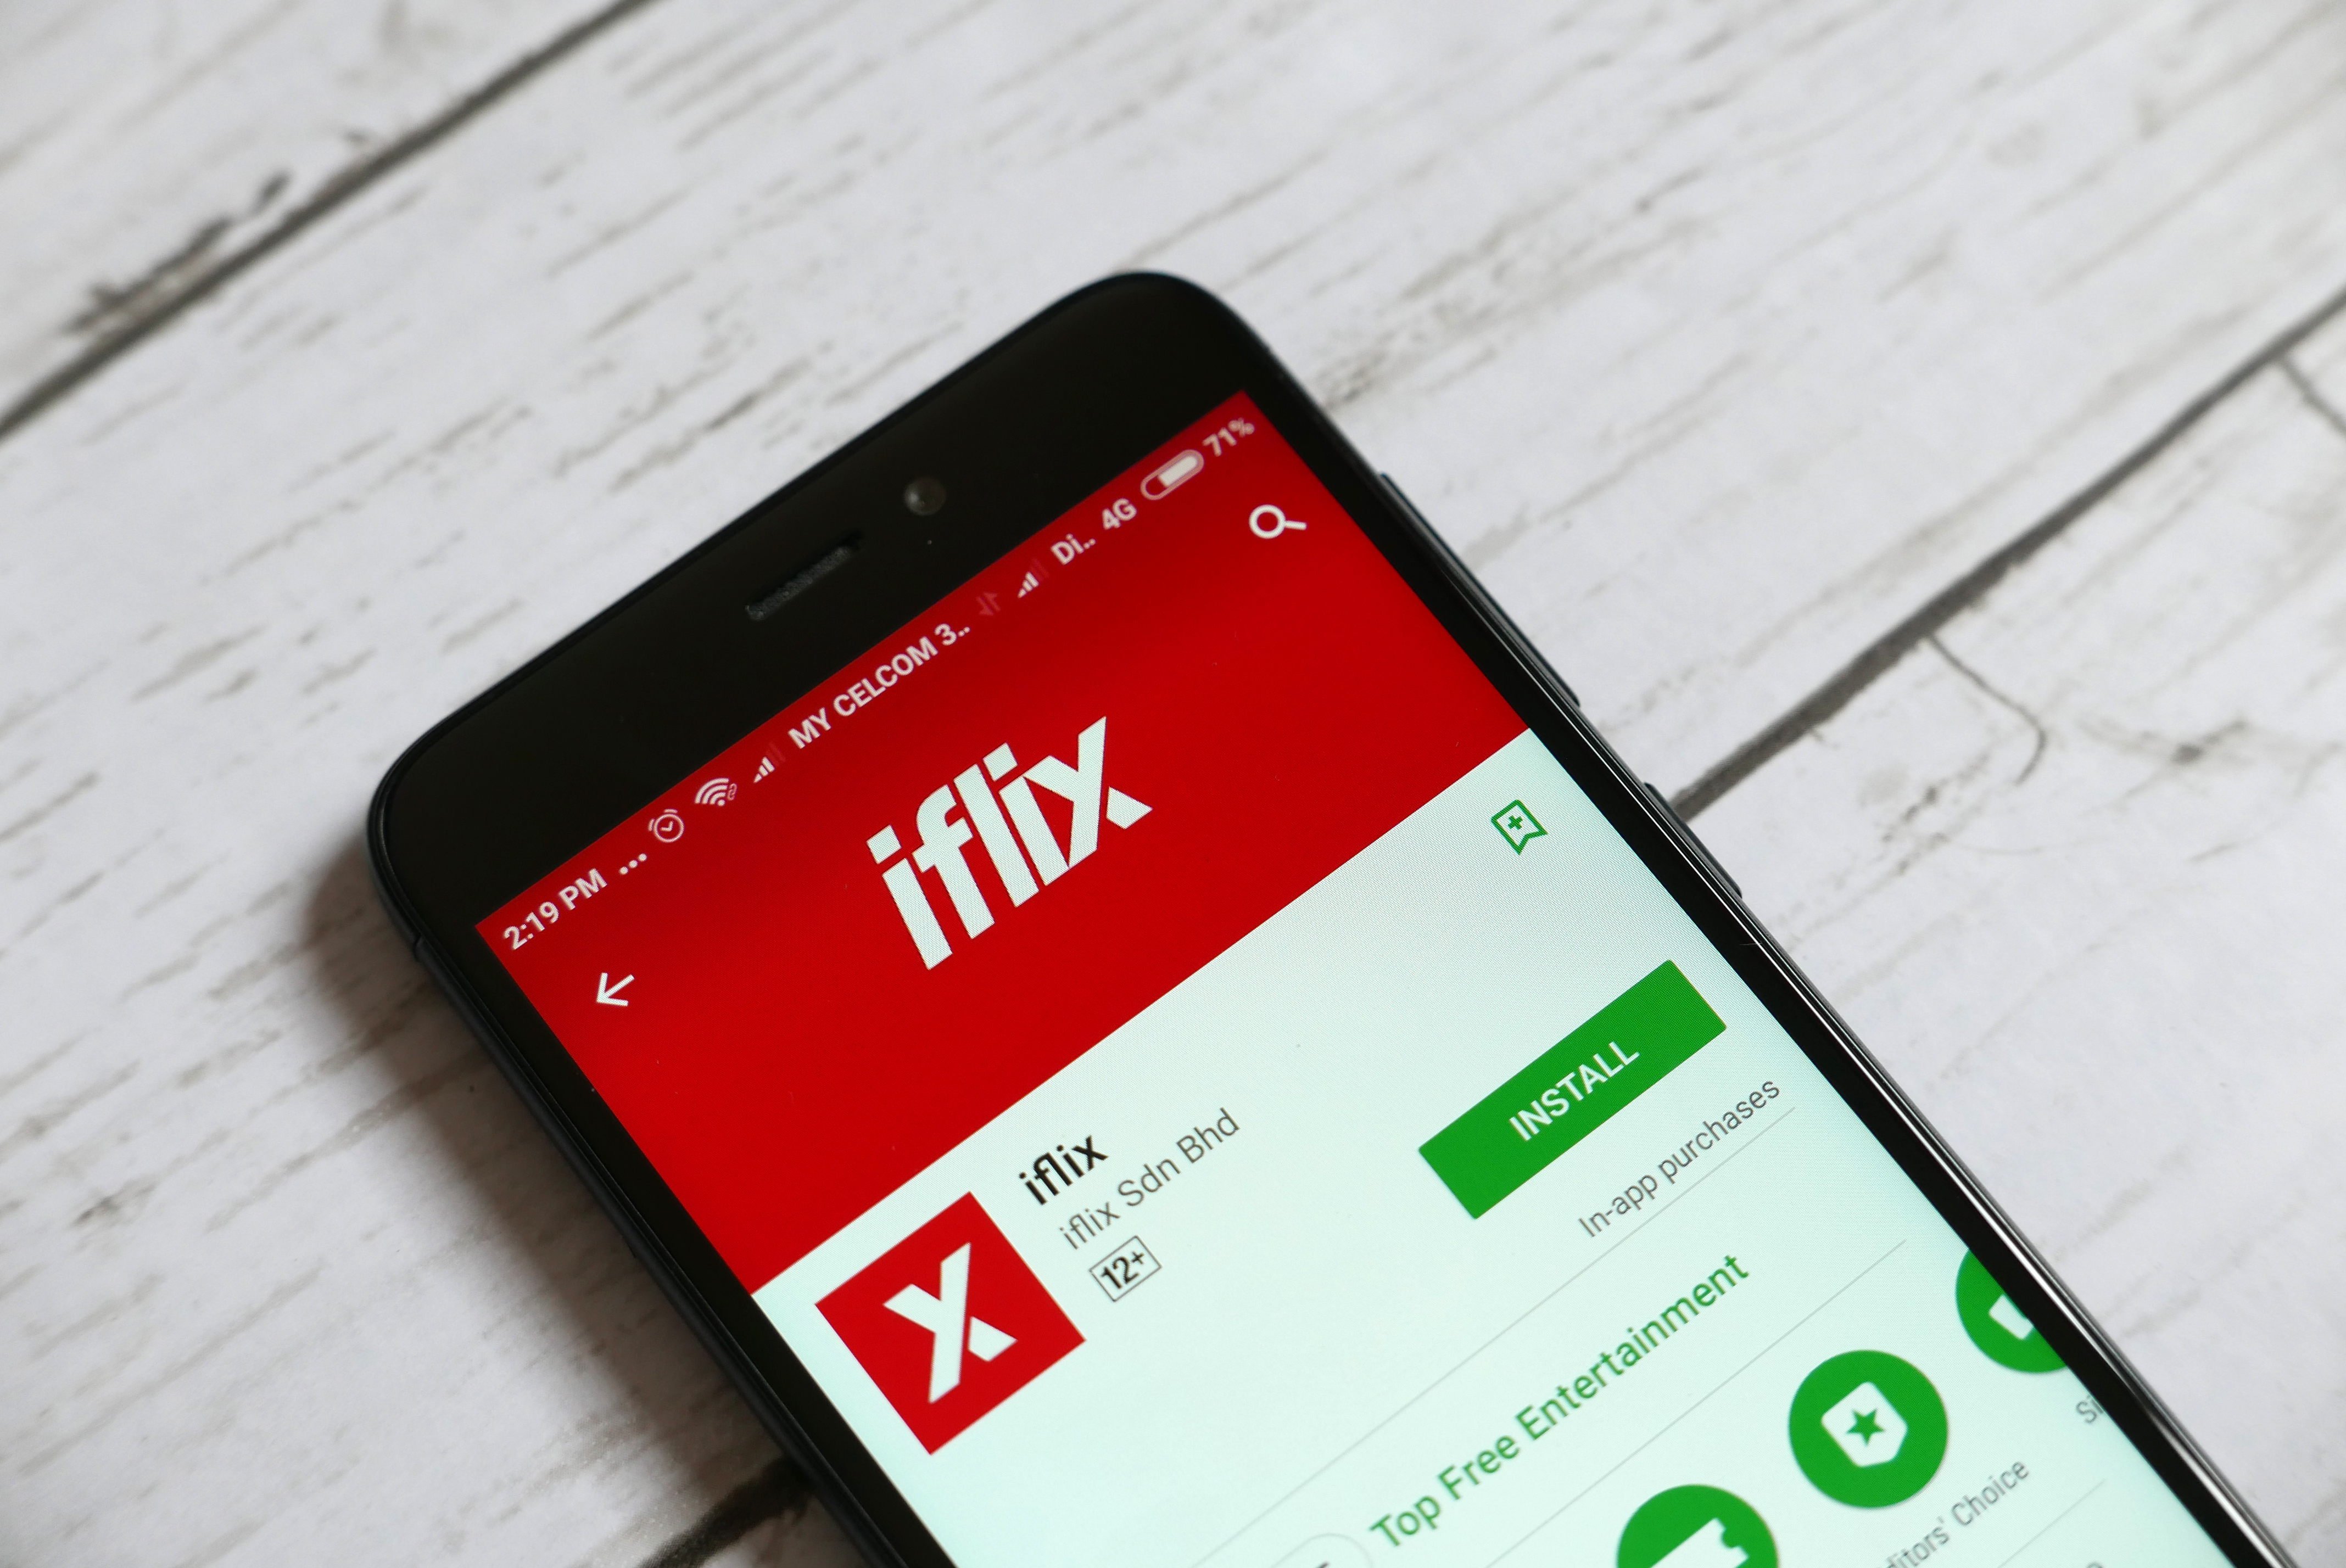 Iflix secures new investment “exceeding USD 50 million” ahead of prospective IPO